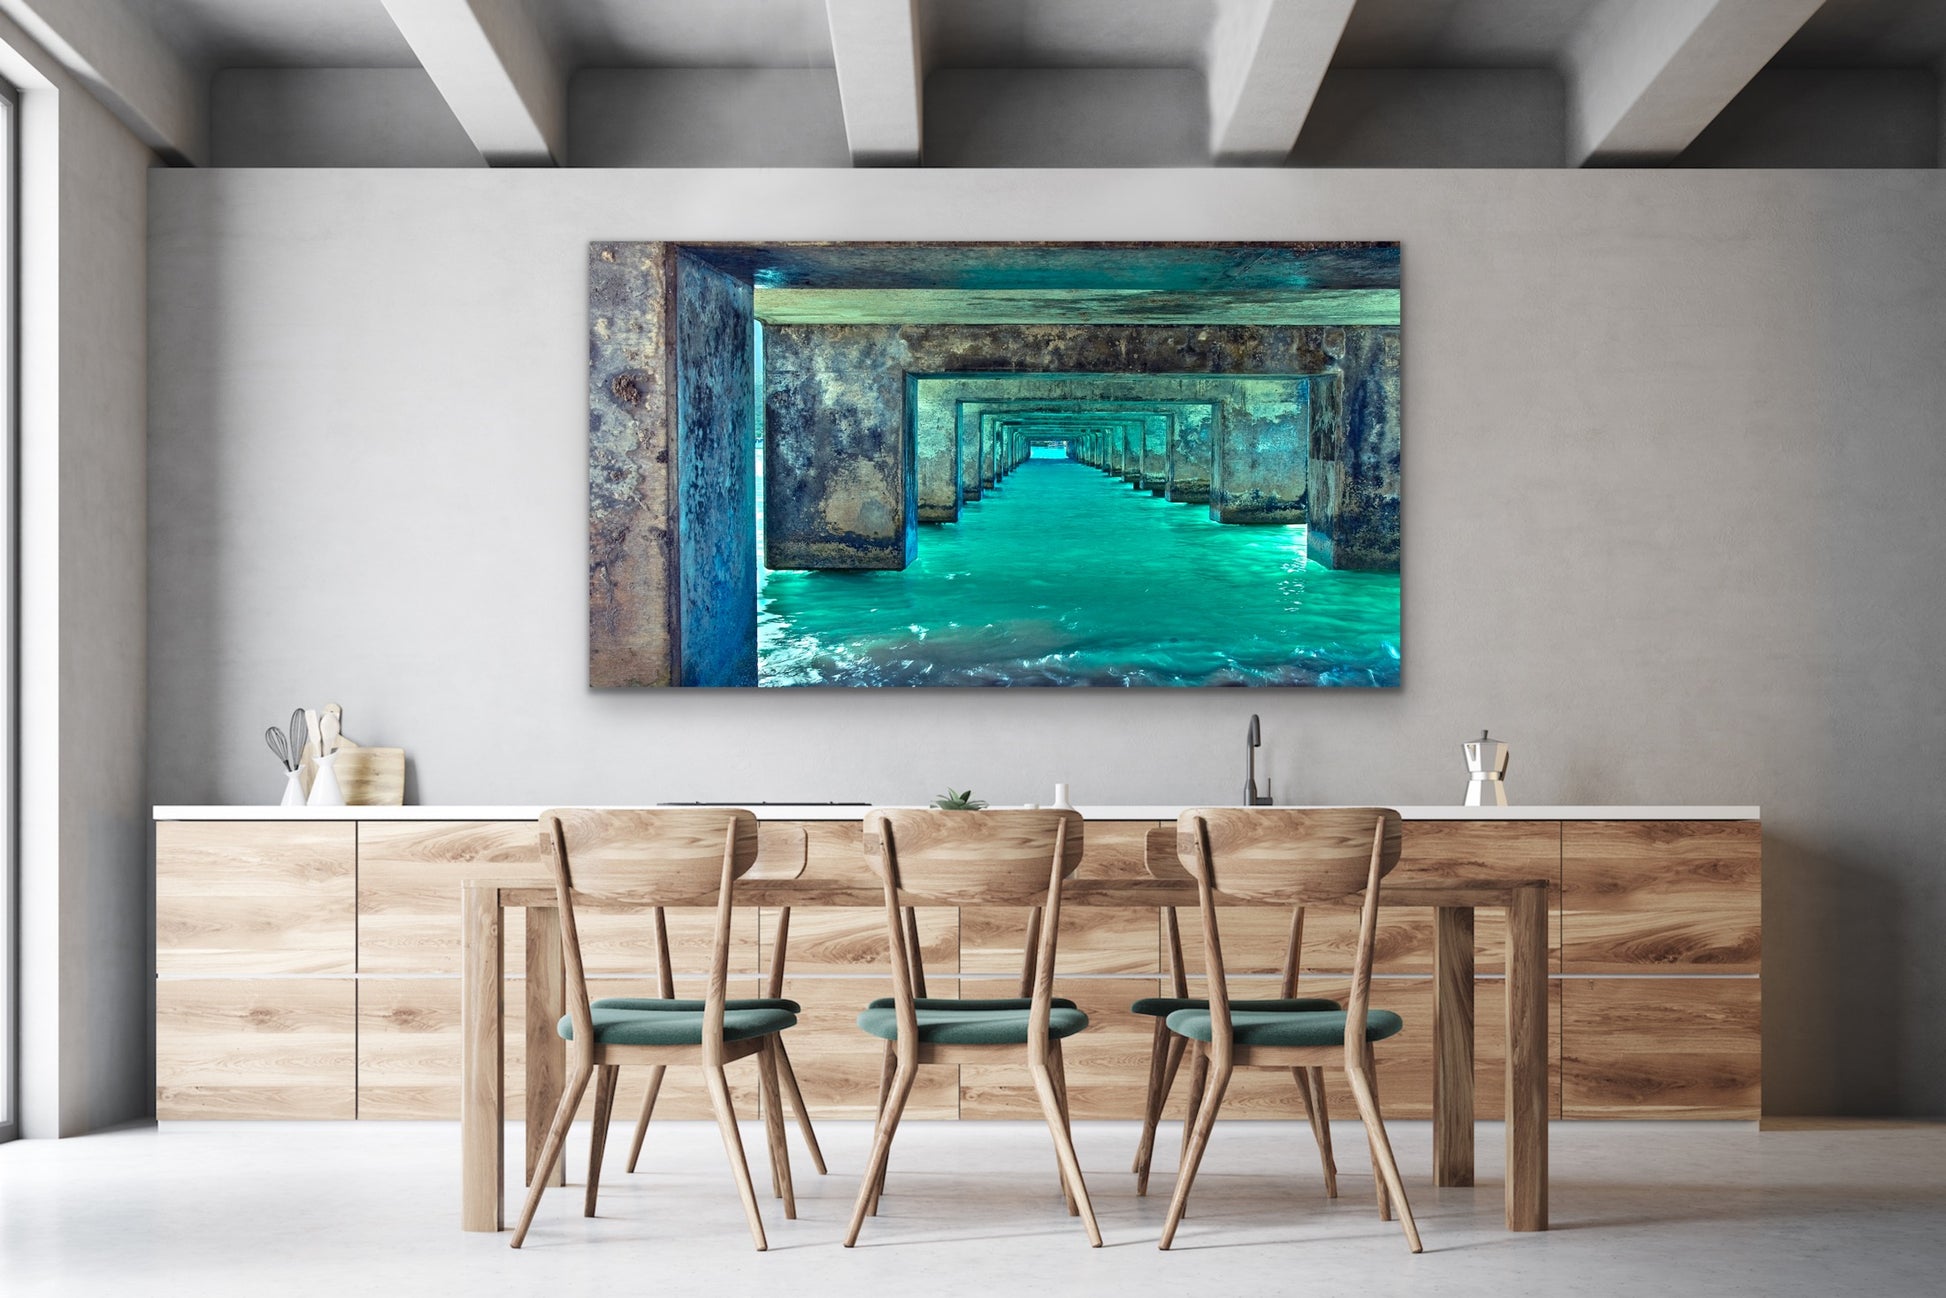 Wall demo of Beneath the Pier, a fine art photograph taken under the Hanalei Pier on Kauai. Scenic landscape photo by Inspiring Images Hawaii.